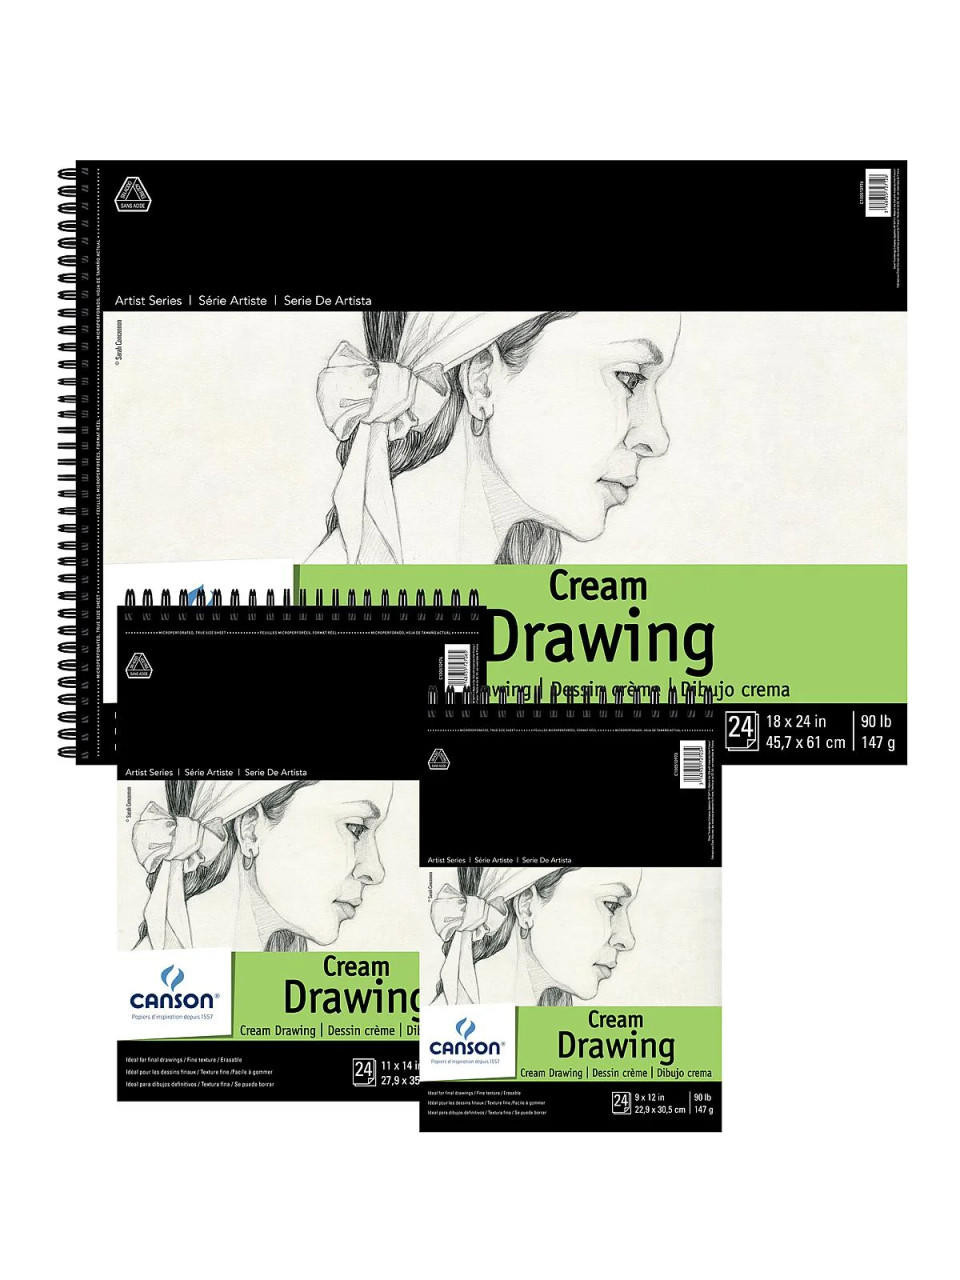 https://cdn11.bigcommerce.com/s-9uf88xhege/images/stencil/1280x1280/products/10536/72039/canson-canson-artist-series-classic-cream-drawing-pad-18-x-24-24-sheetspad__80460.1677708711.jpg?c=1?imbypass=on